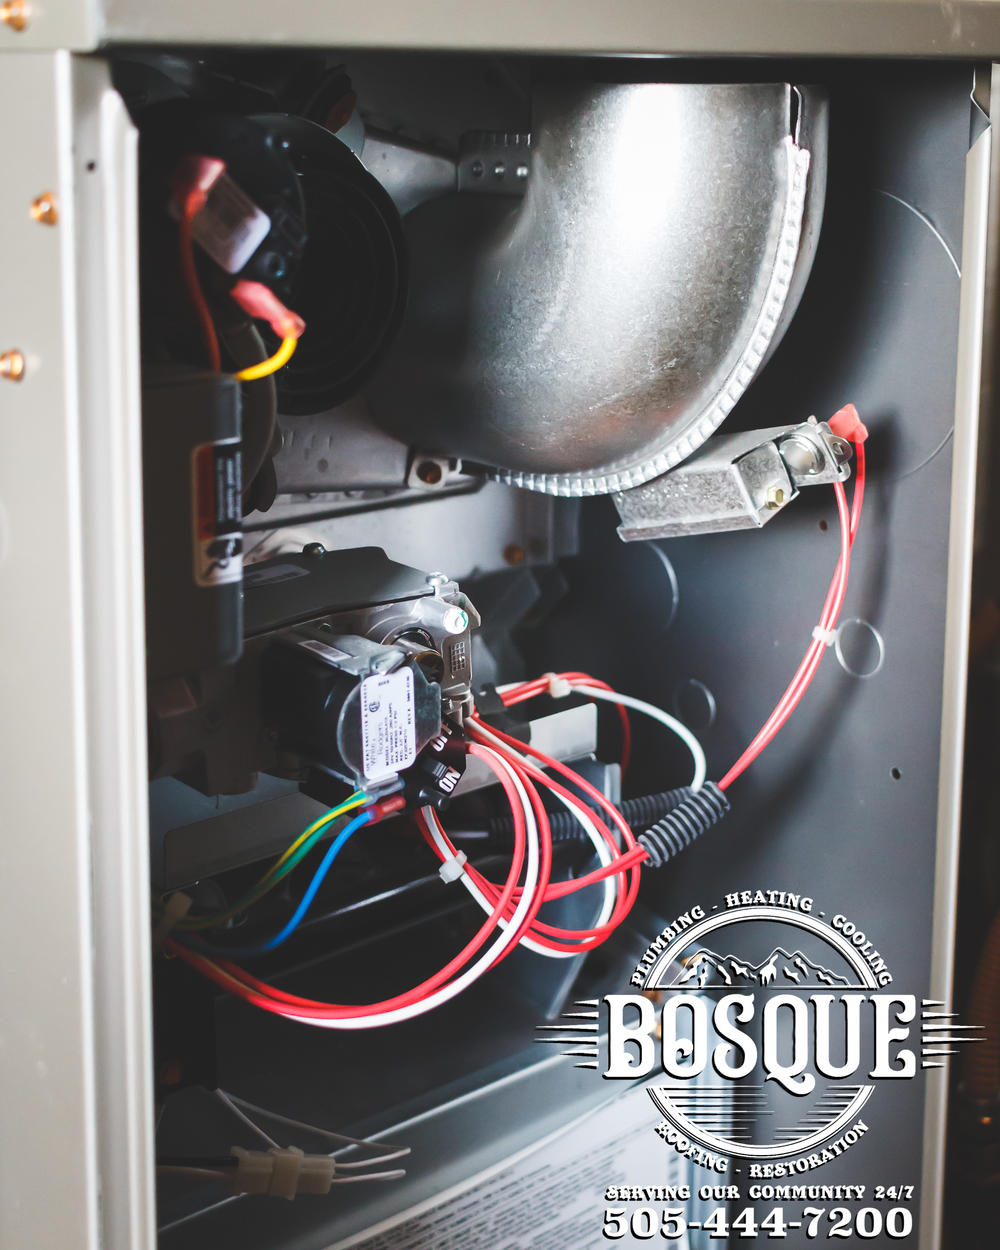 Bosque Heating Cooling and Plumbing Photo